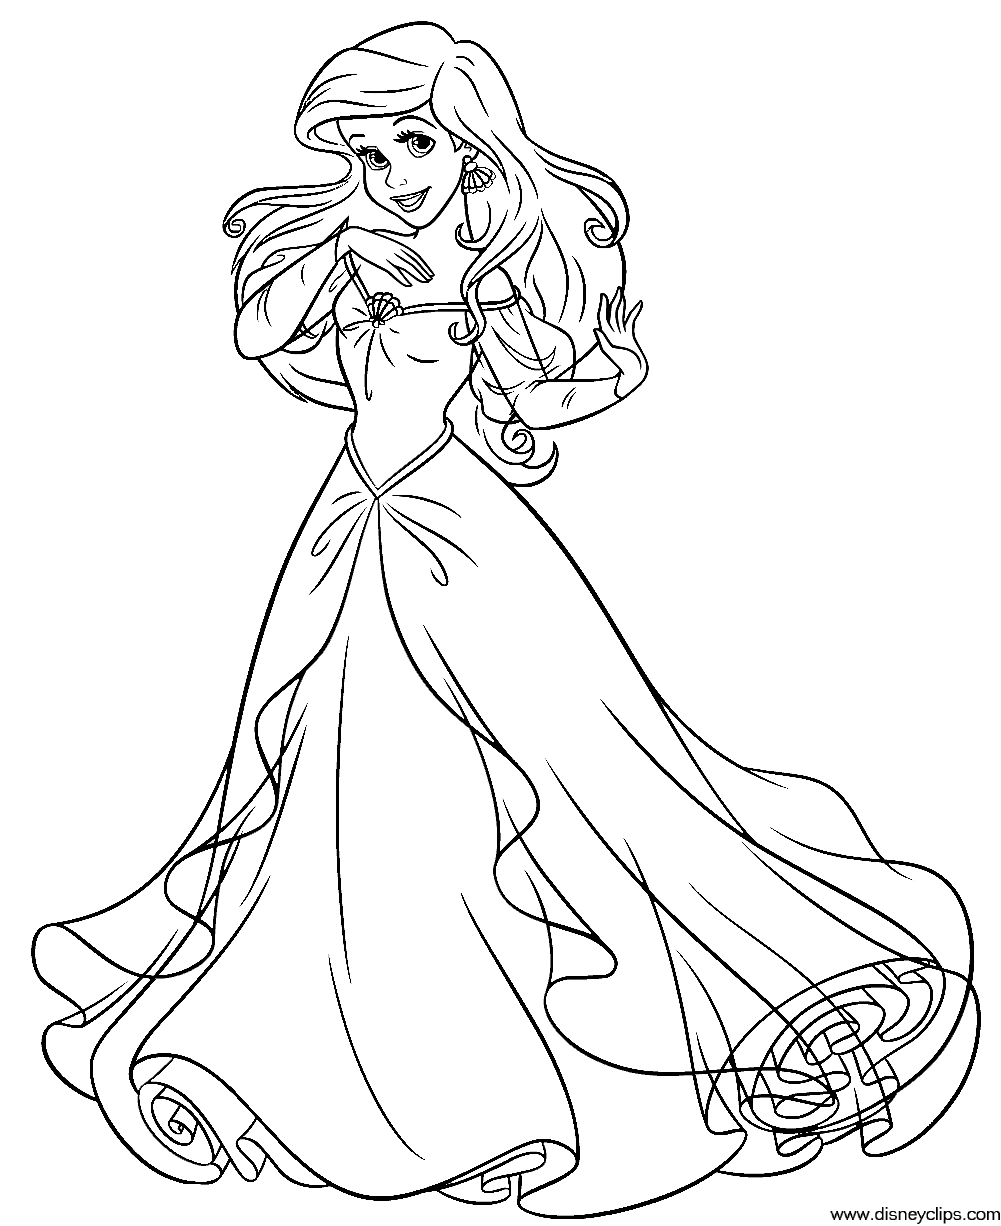 ariel coloring page ariel the little mermaid coloring pages for girls to print page ariel coloring 